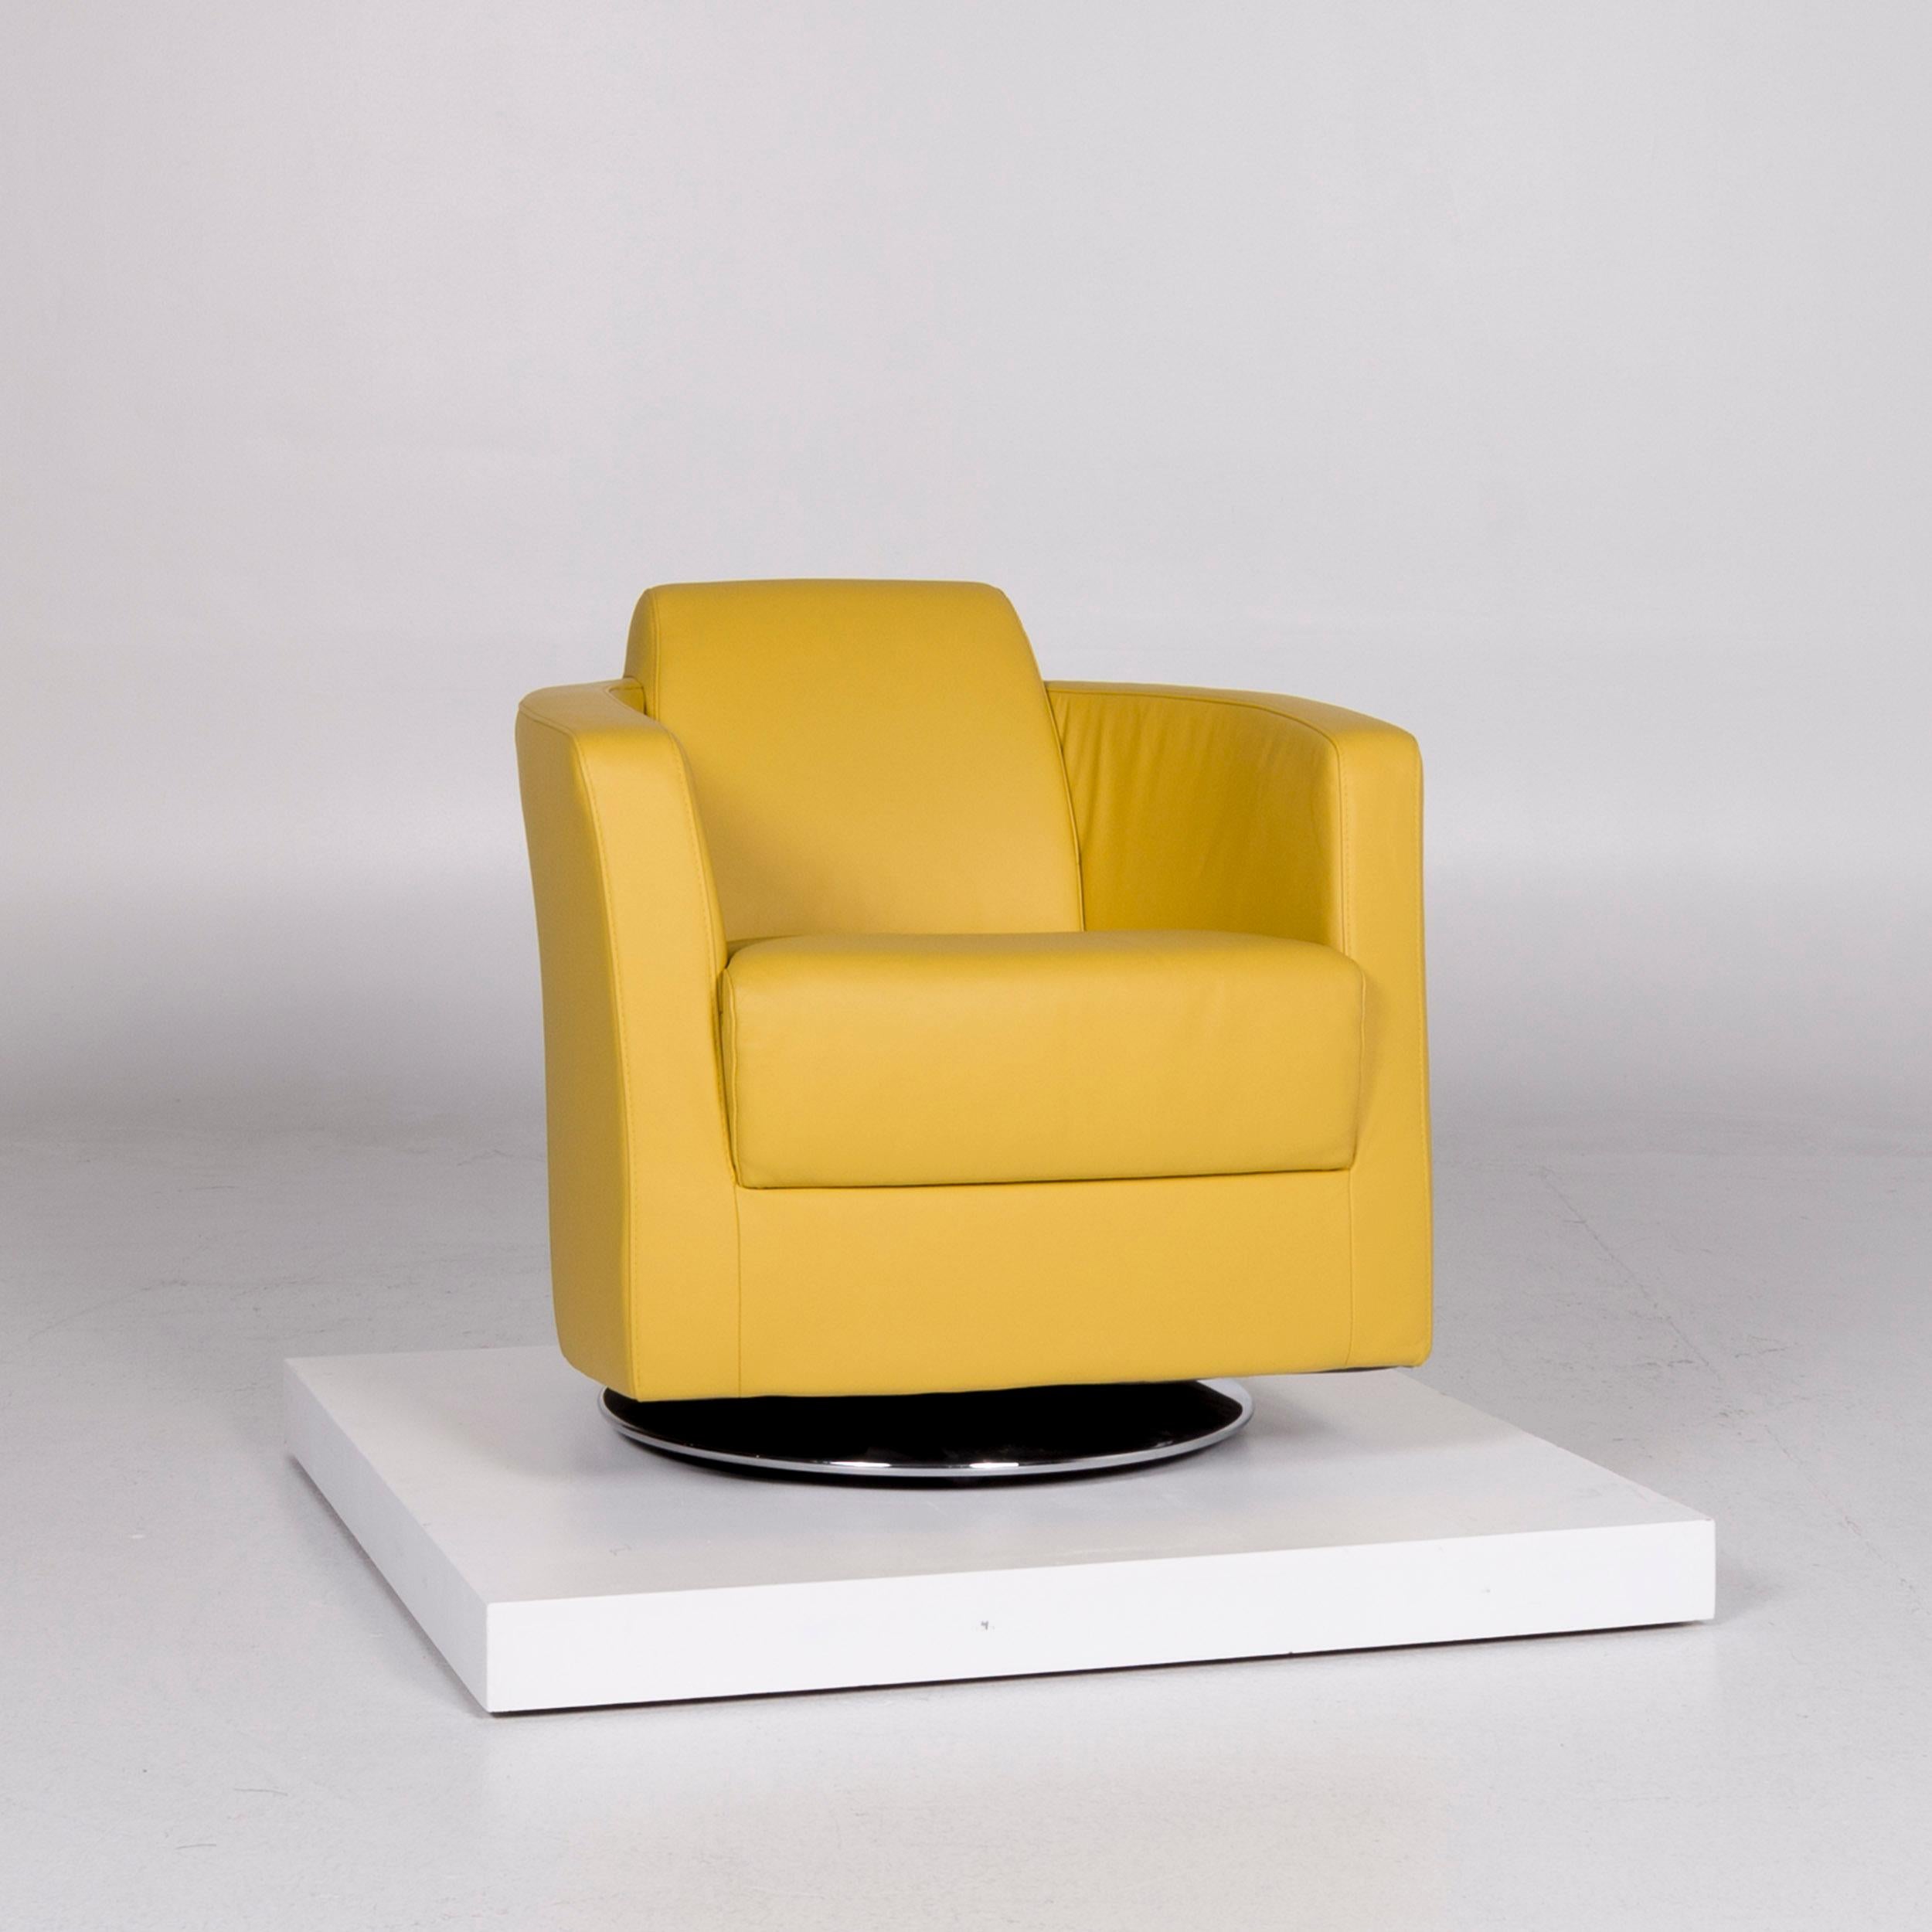 We bring to you an Ewald Schillig Sam leather armchair yellow club chair.
 
 Product measurements in centimeters:
 
Depth 80
Width 72
Height 75
Seat-height 46
Rest-height 64
Seat-depth 55
Seat-width 51
Back-height 32.
 